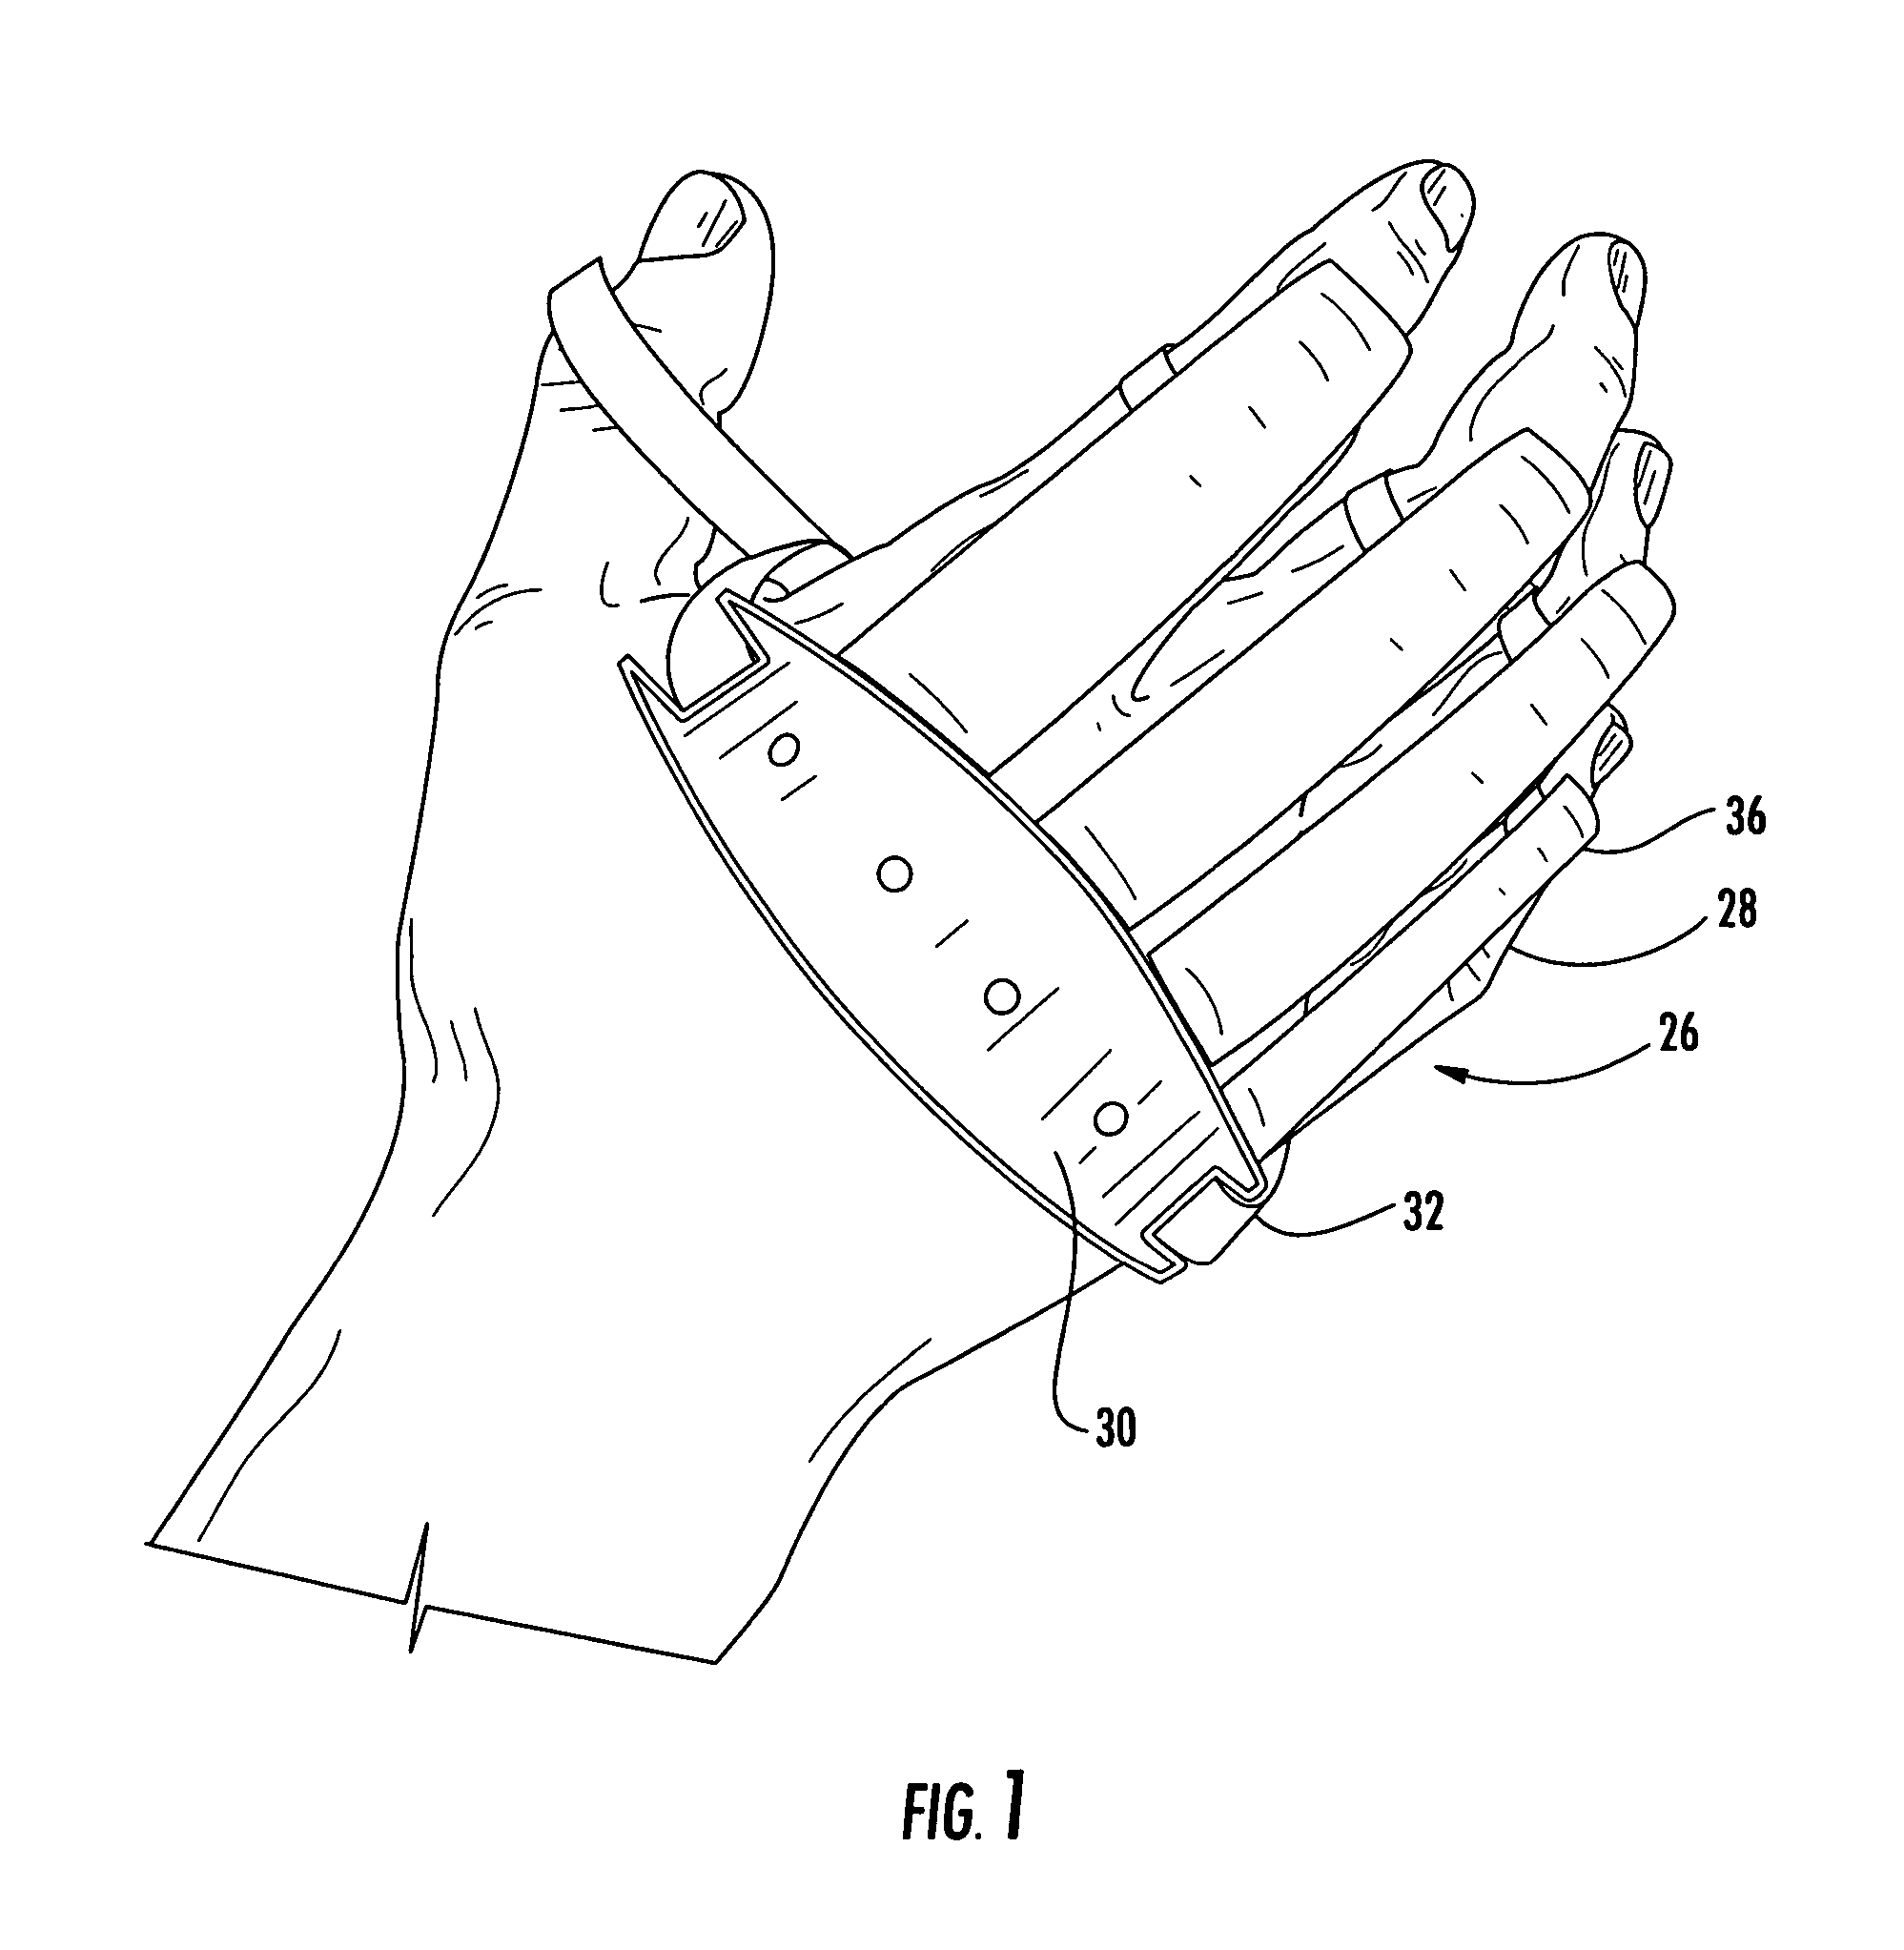 Musical teaching device and method using gloves and a virtual keyboard